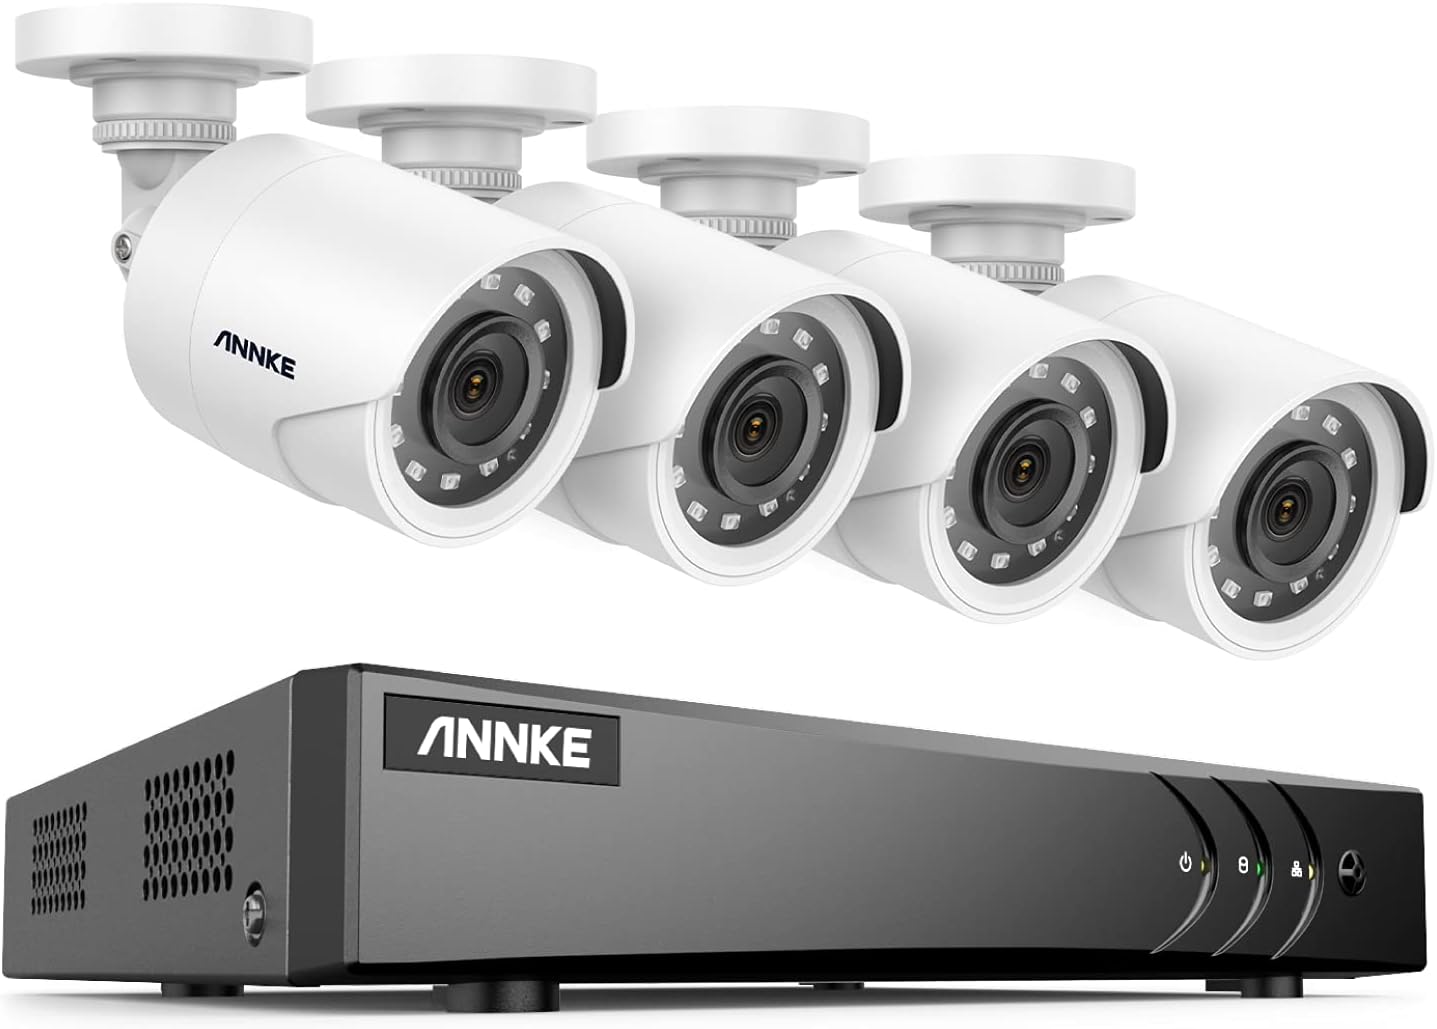 ANNKE 8CH Security Camera System Review